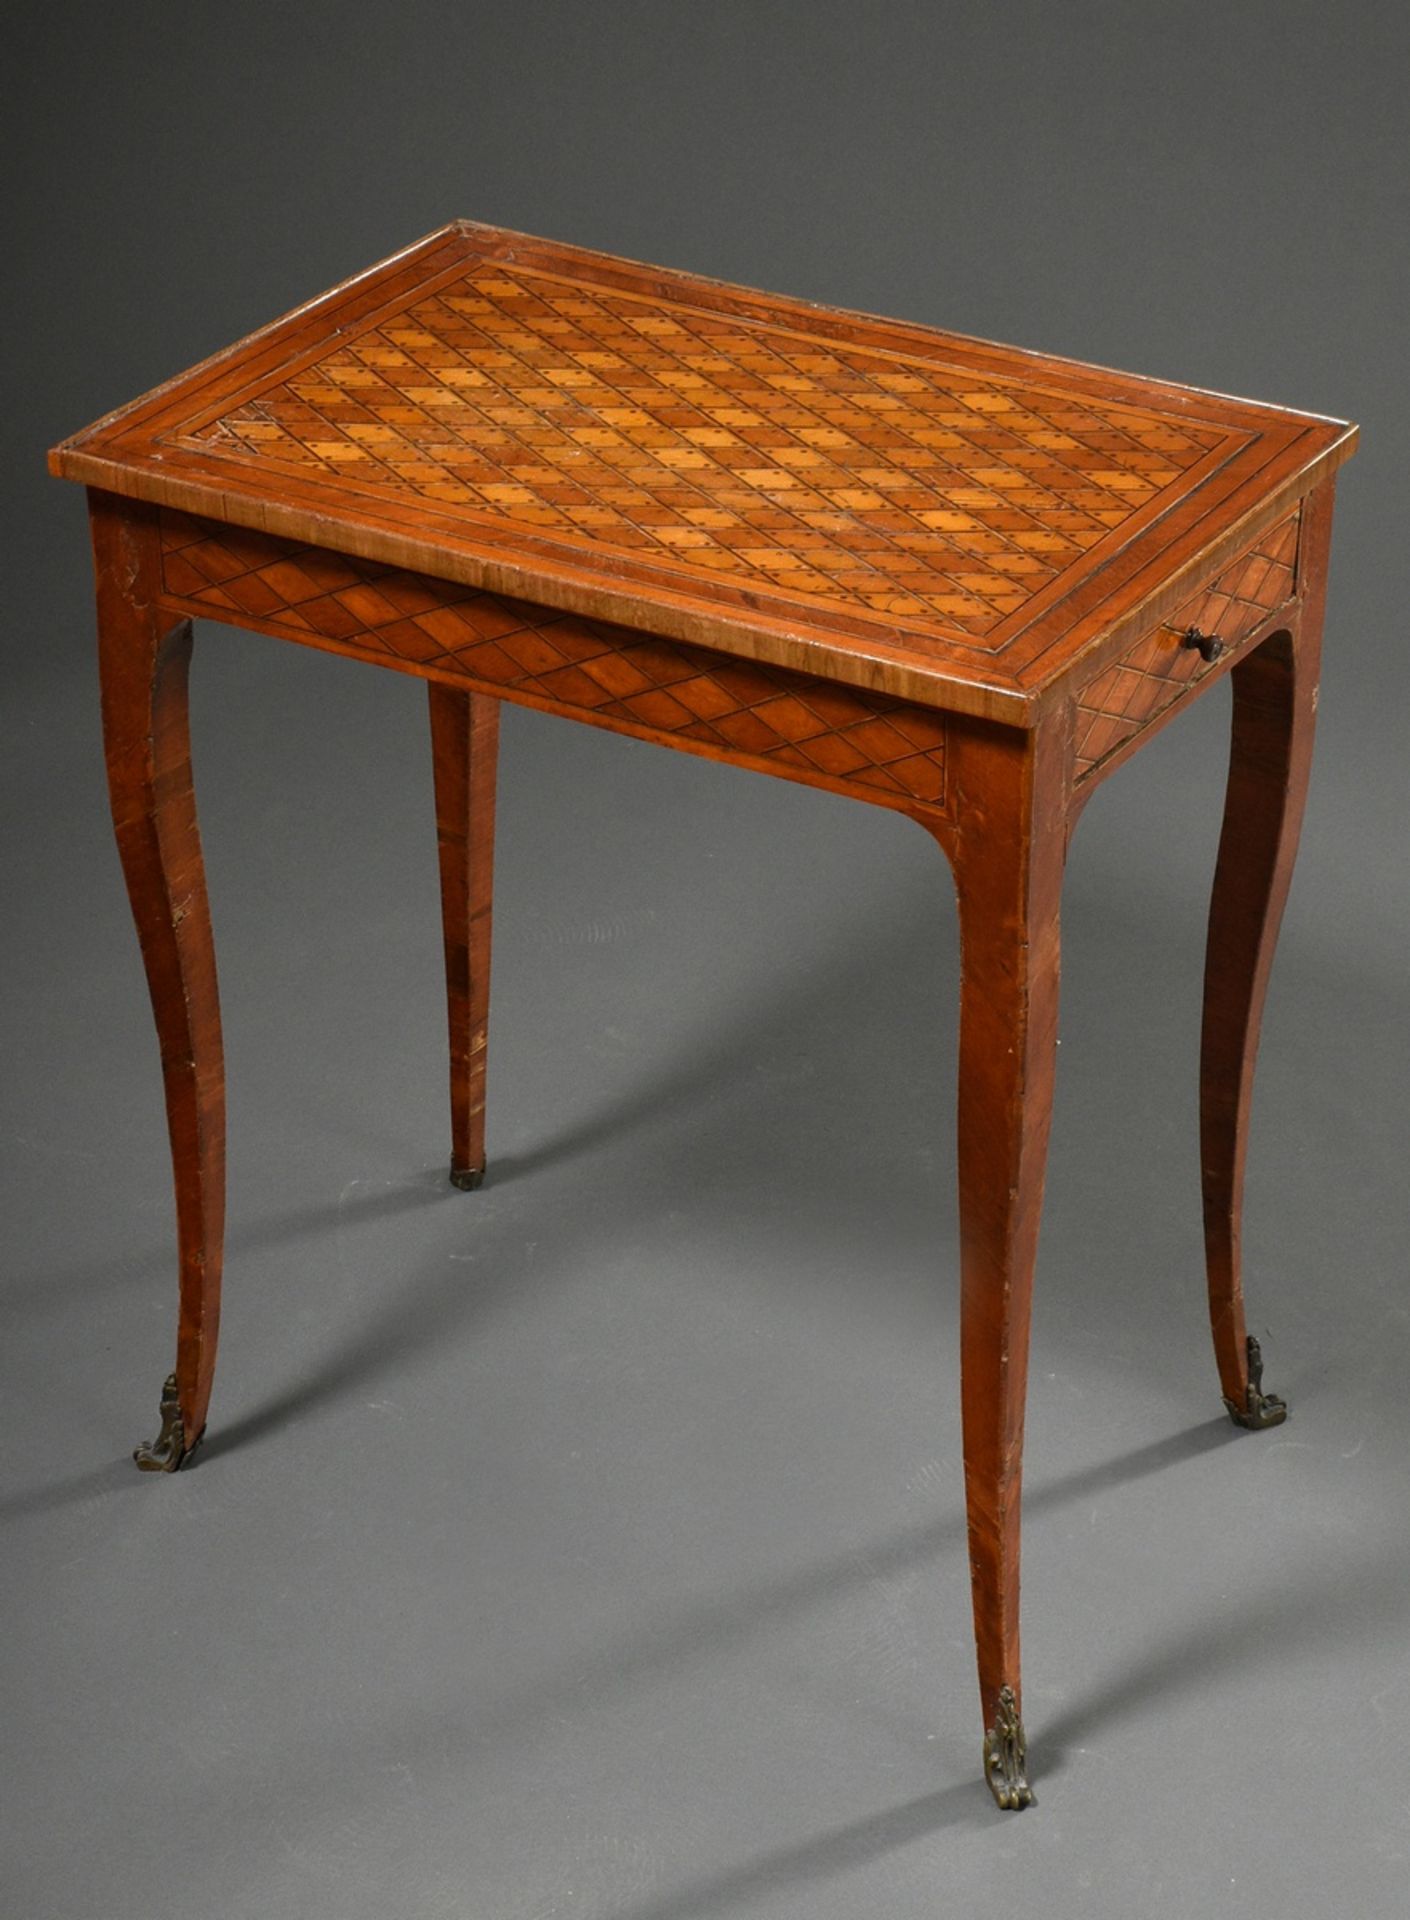 Ornamental Louis XV table with diamond and dot inlays on curved legs with ornamented bronze shoes, 